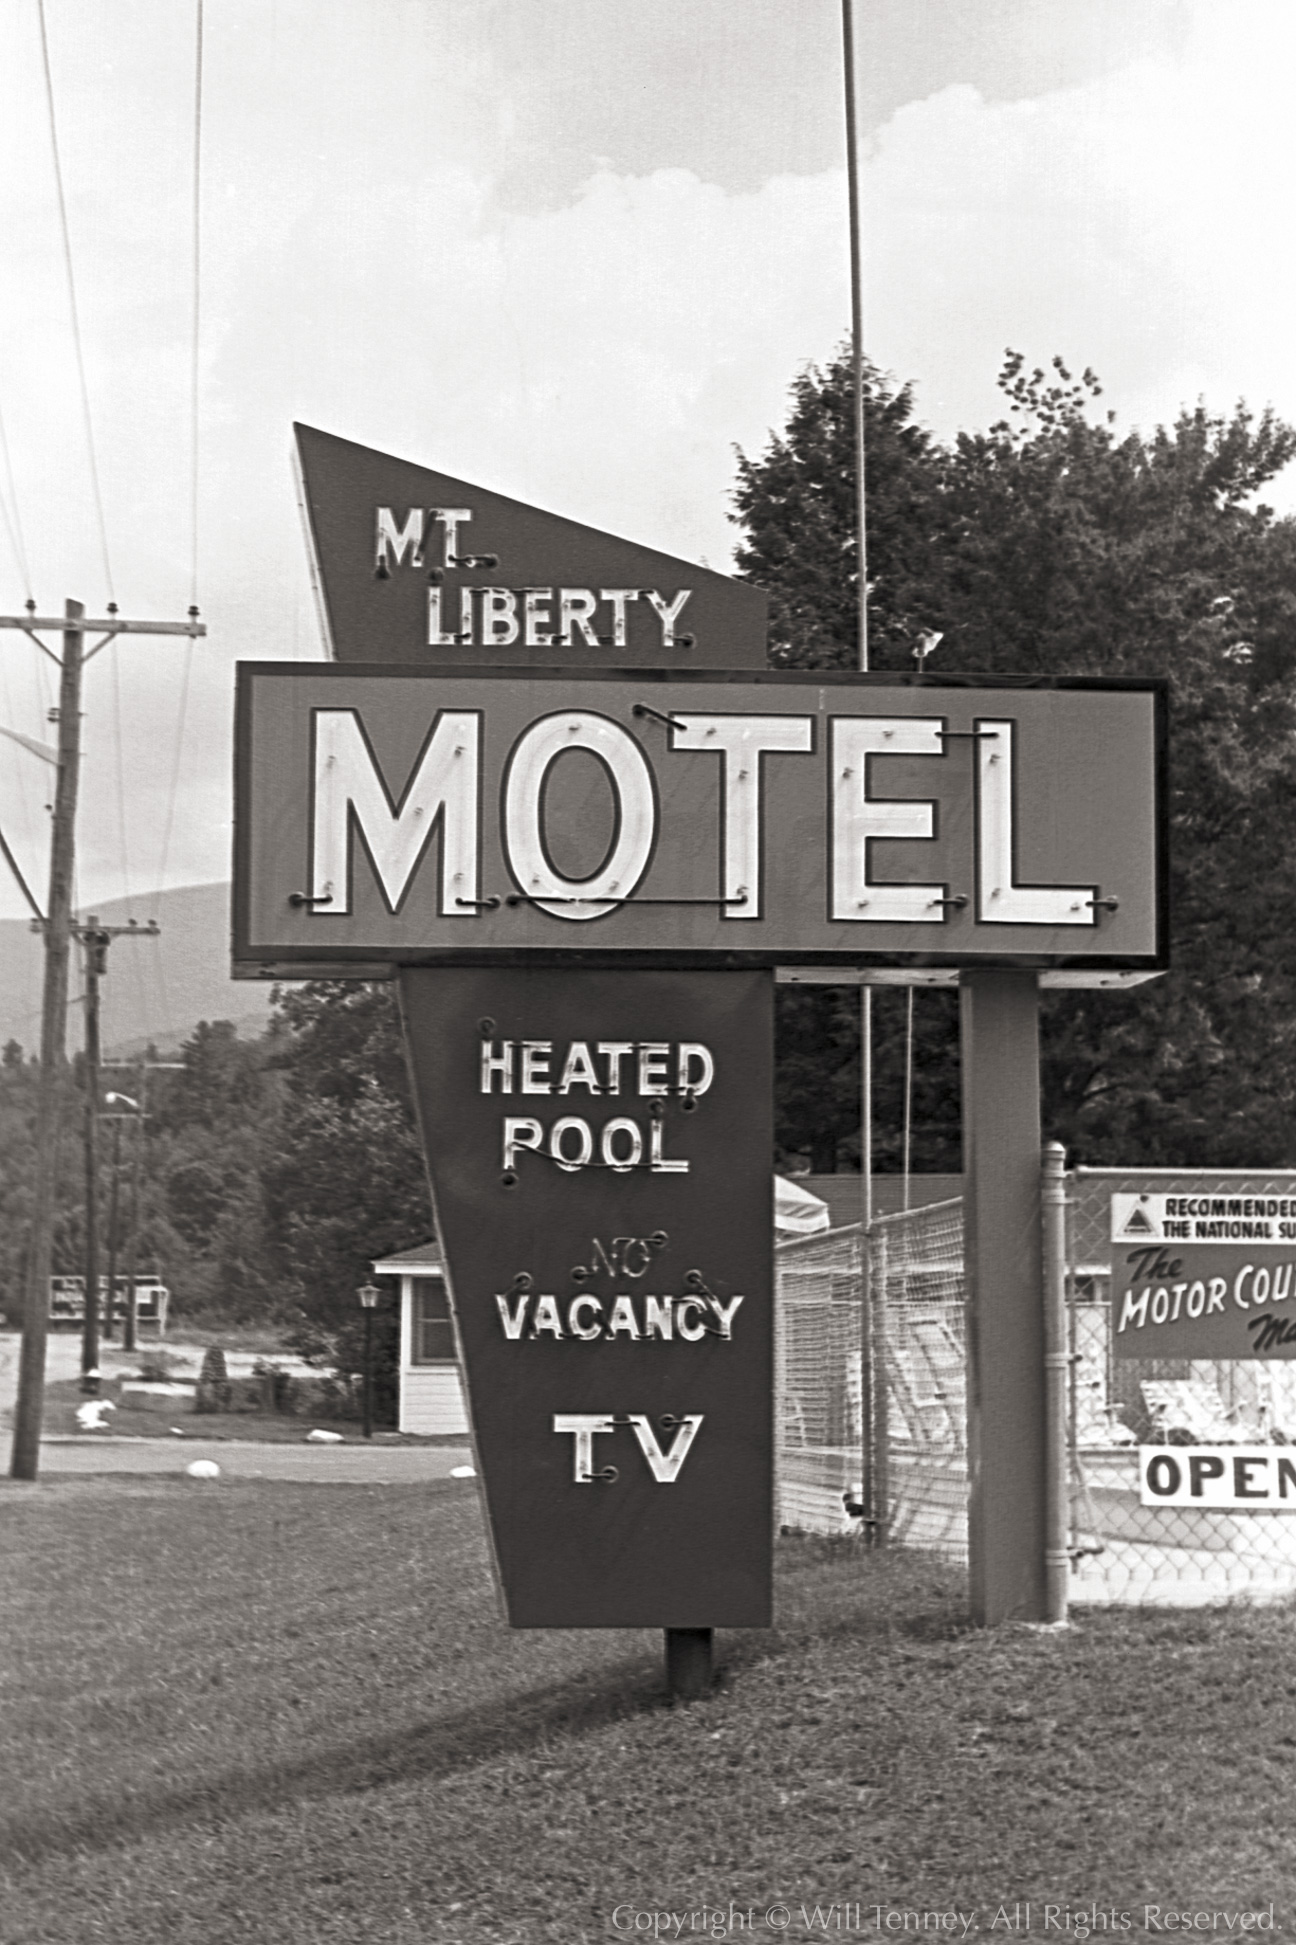 Mt. Liberty Motel: Photograph by Will Tenney